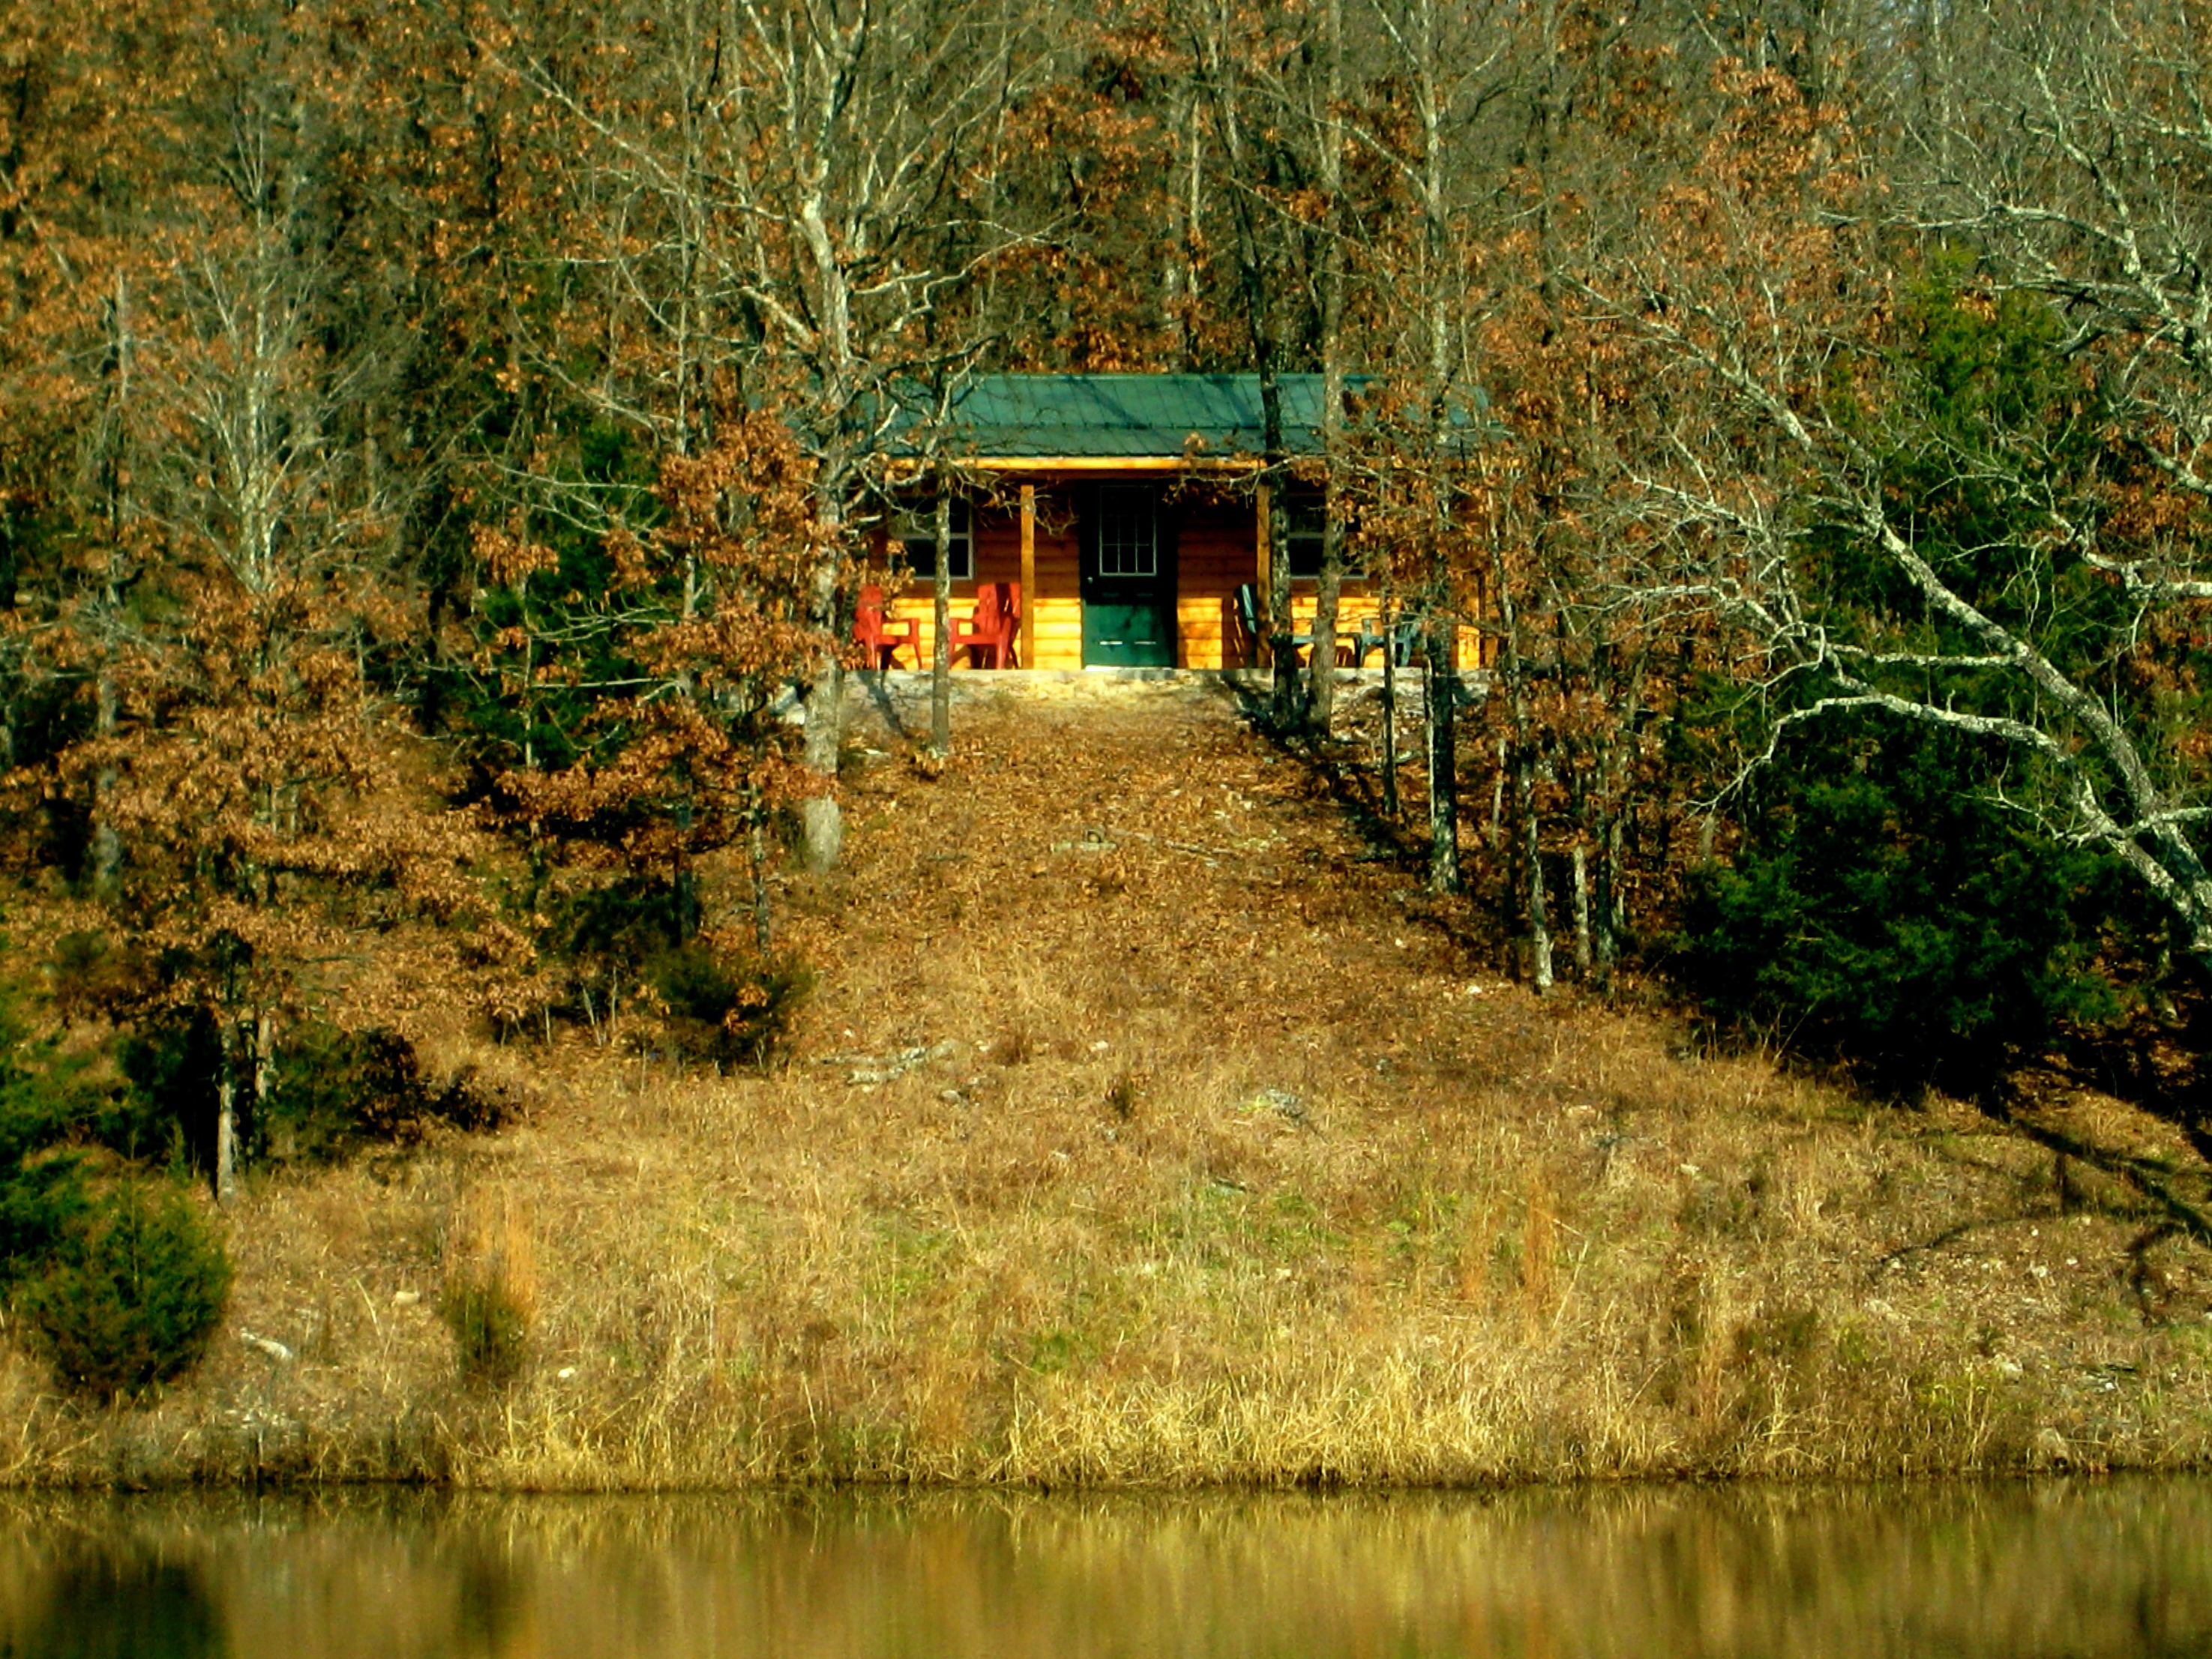 The Cabin on Lake Marguerite.